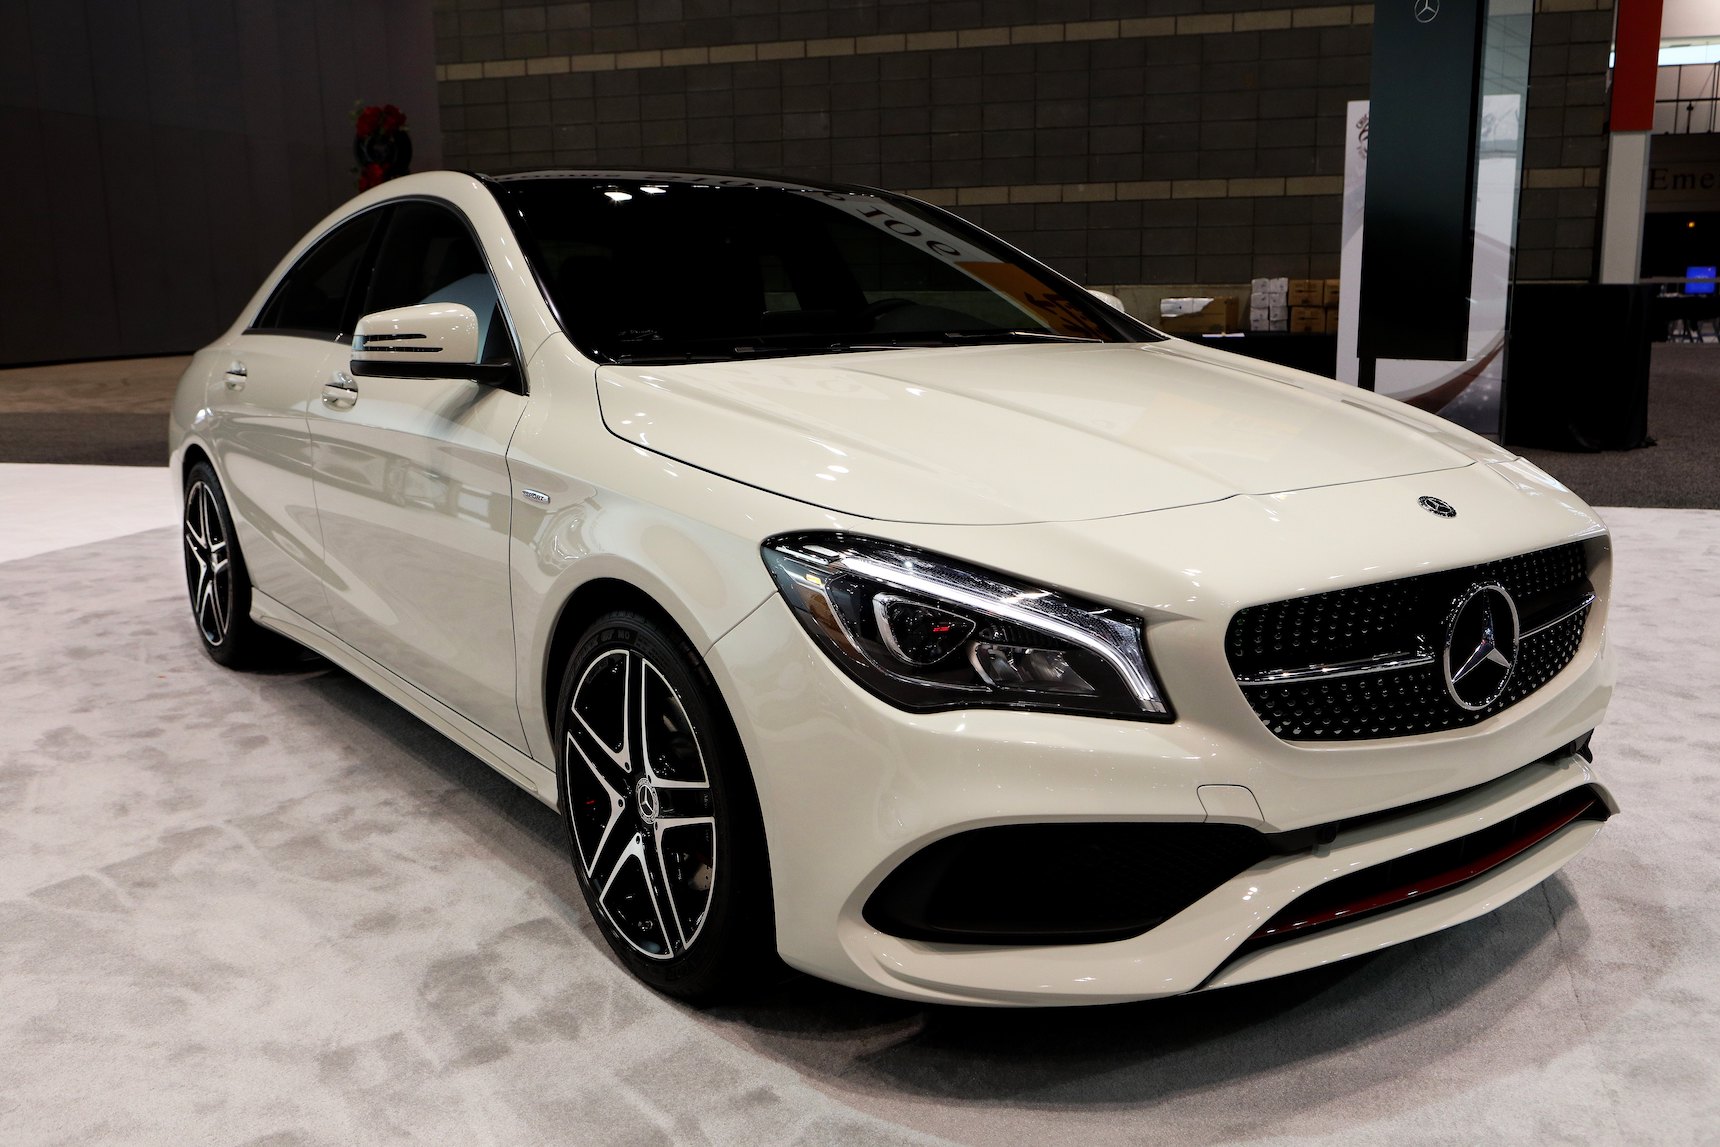 2018 Mercedes-Benz CLA 250 Coupe is on display at the 110th Annual Chicago Auto Show